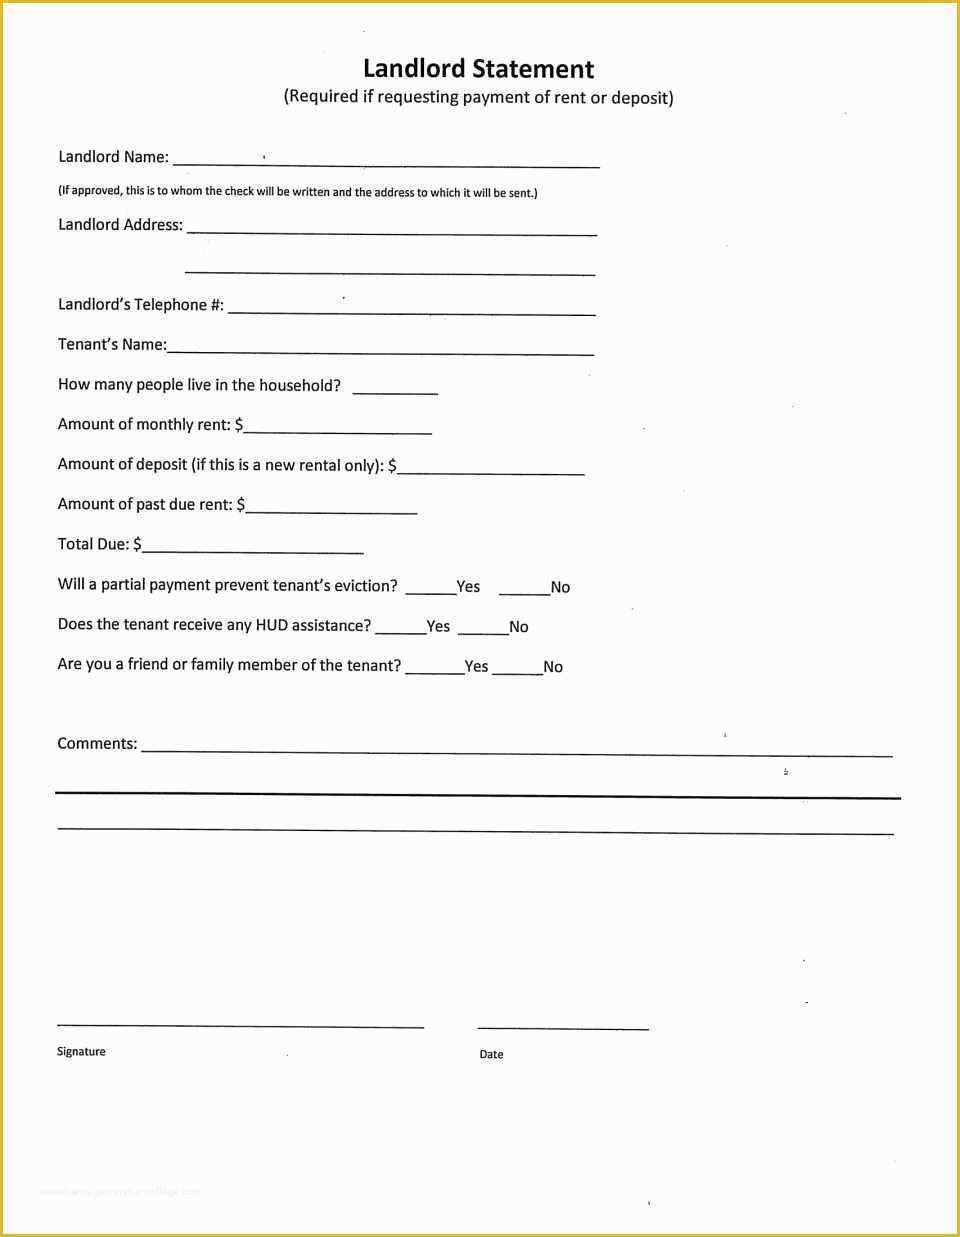 Free Landlord Templates Of Landlord Rent Statement Template form Buffalo Ny Itemized